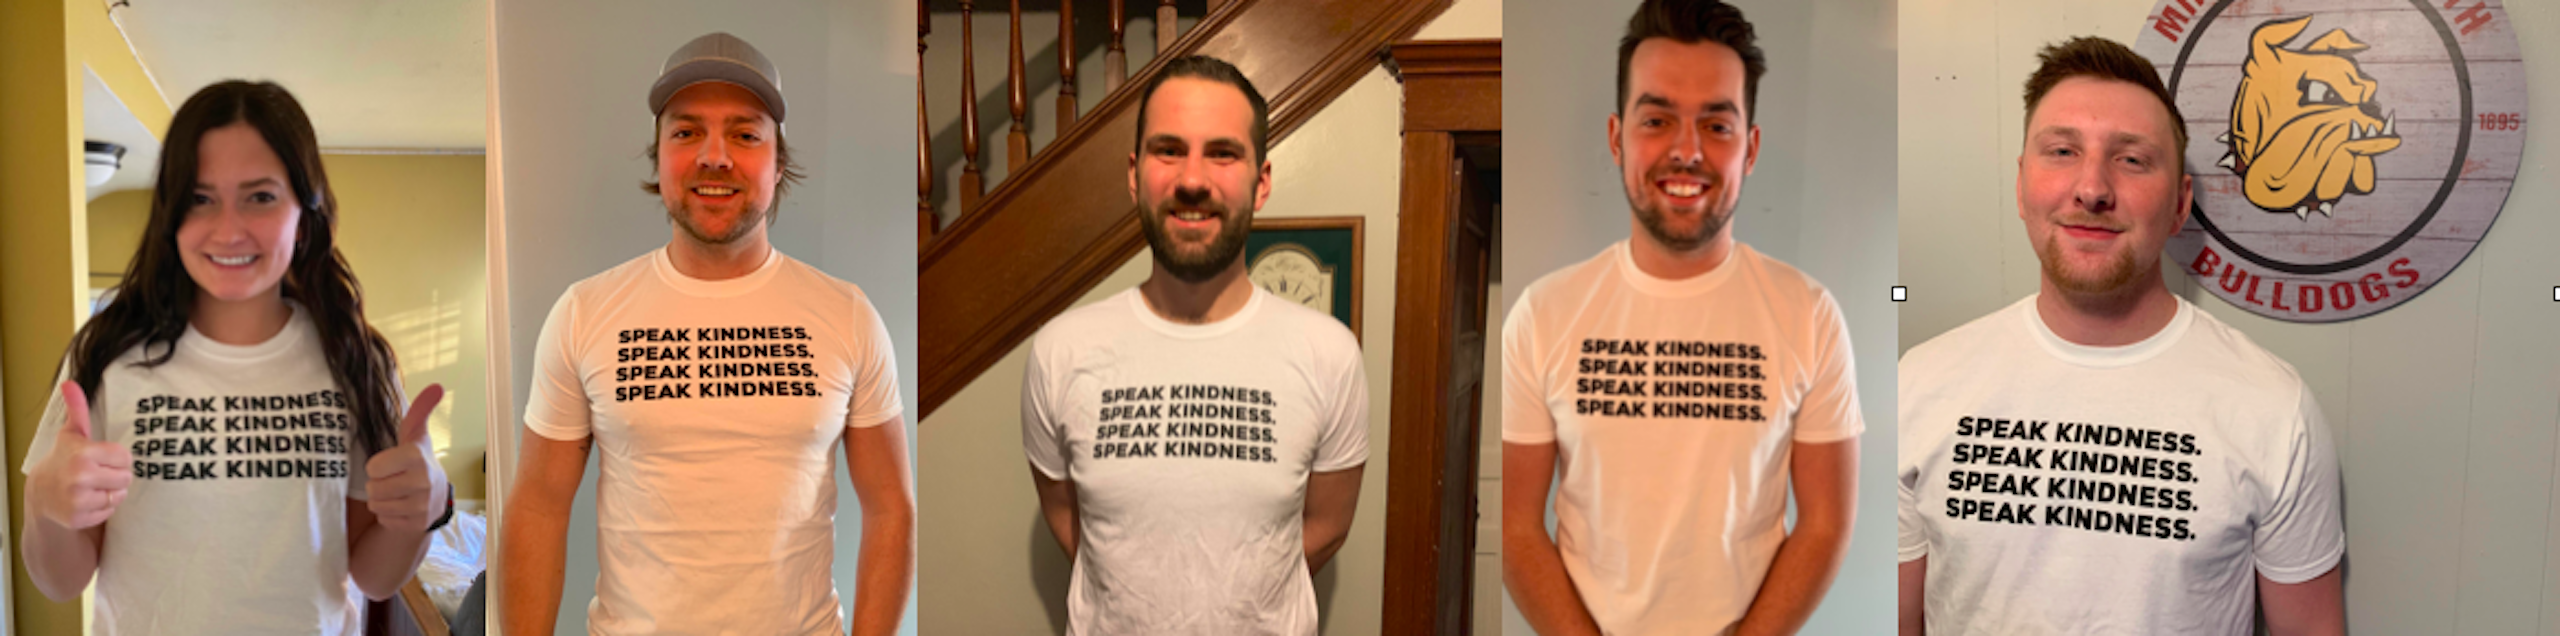 Collage of images of students wearing white t-shirts with "Speak Kindness" written on them 